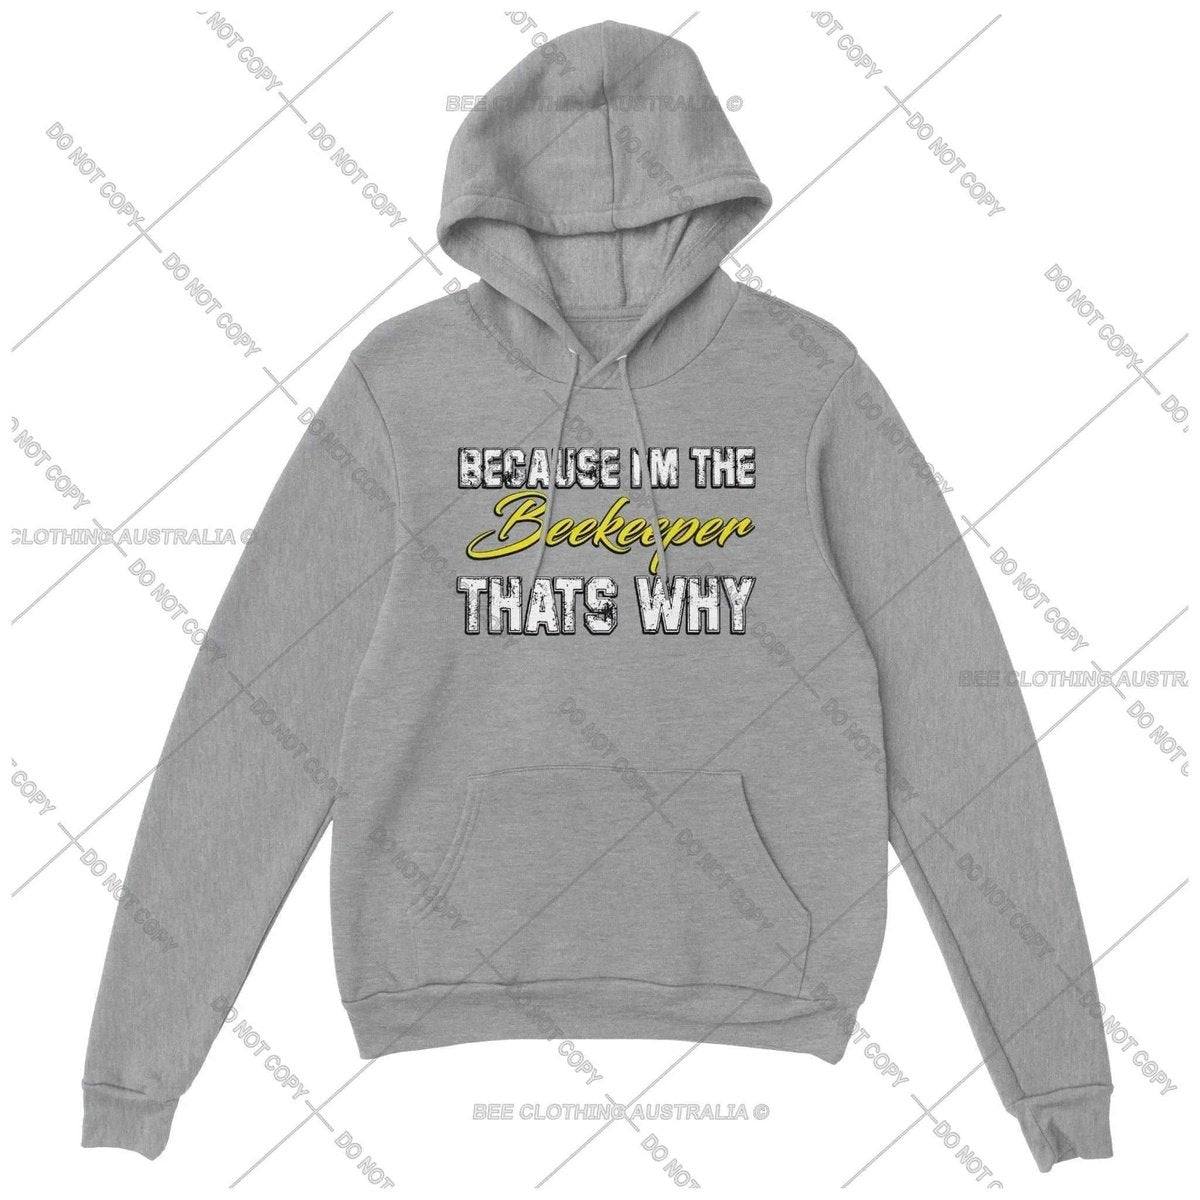 Because I'm the beekeeper that's why Hoodie - Premium Unisex Pullover Hoodie Australia Online Color Sports Grey / XS